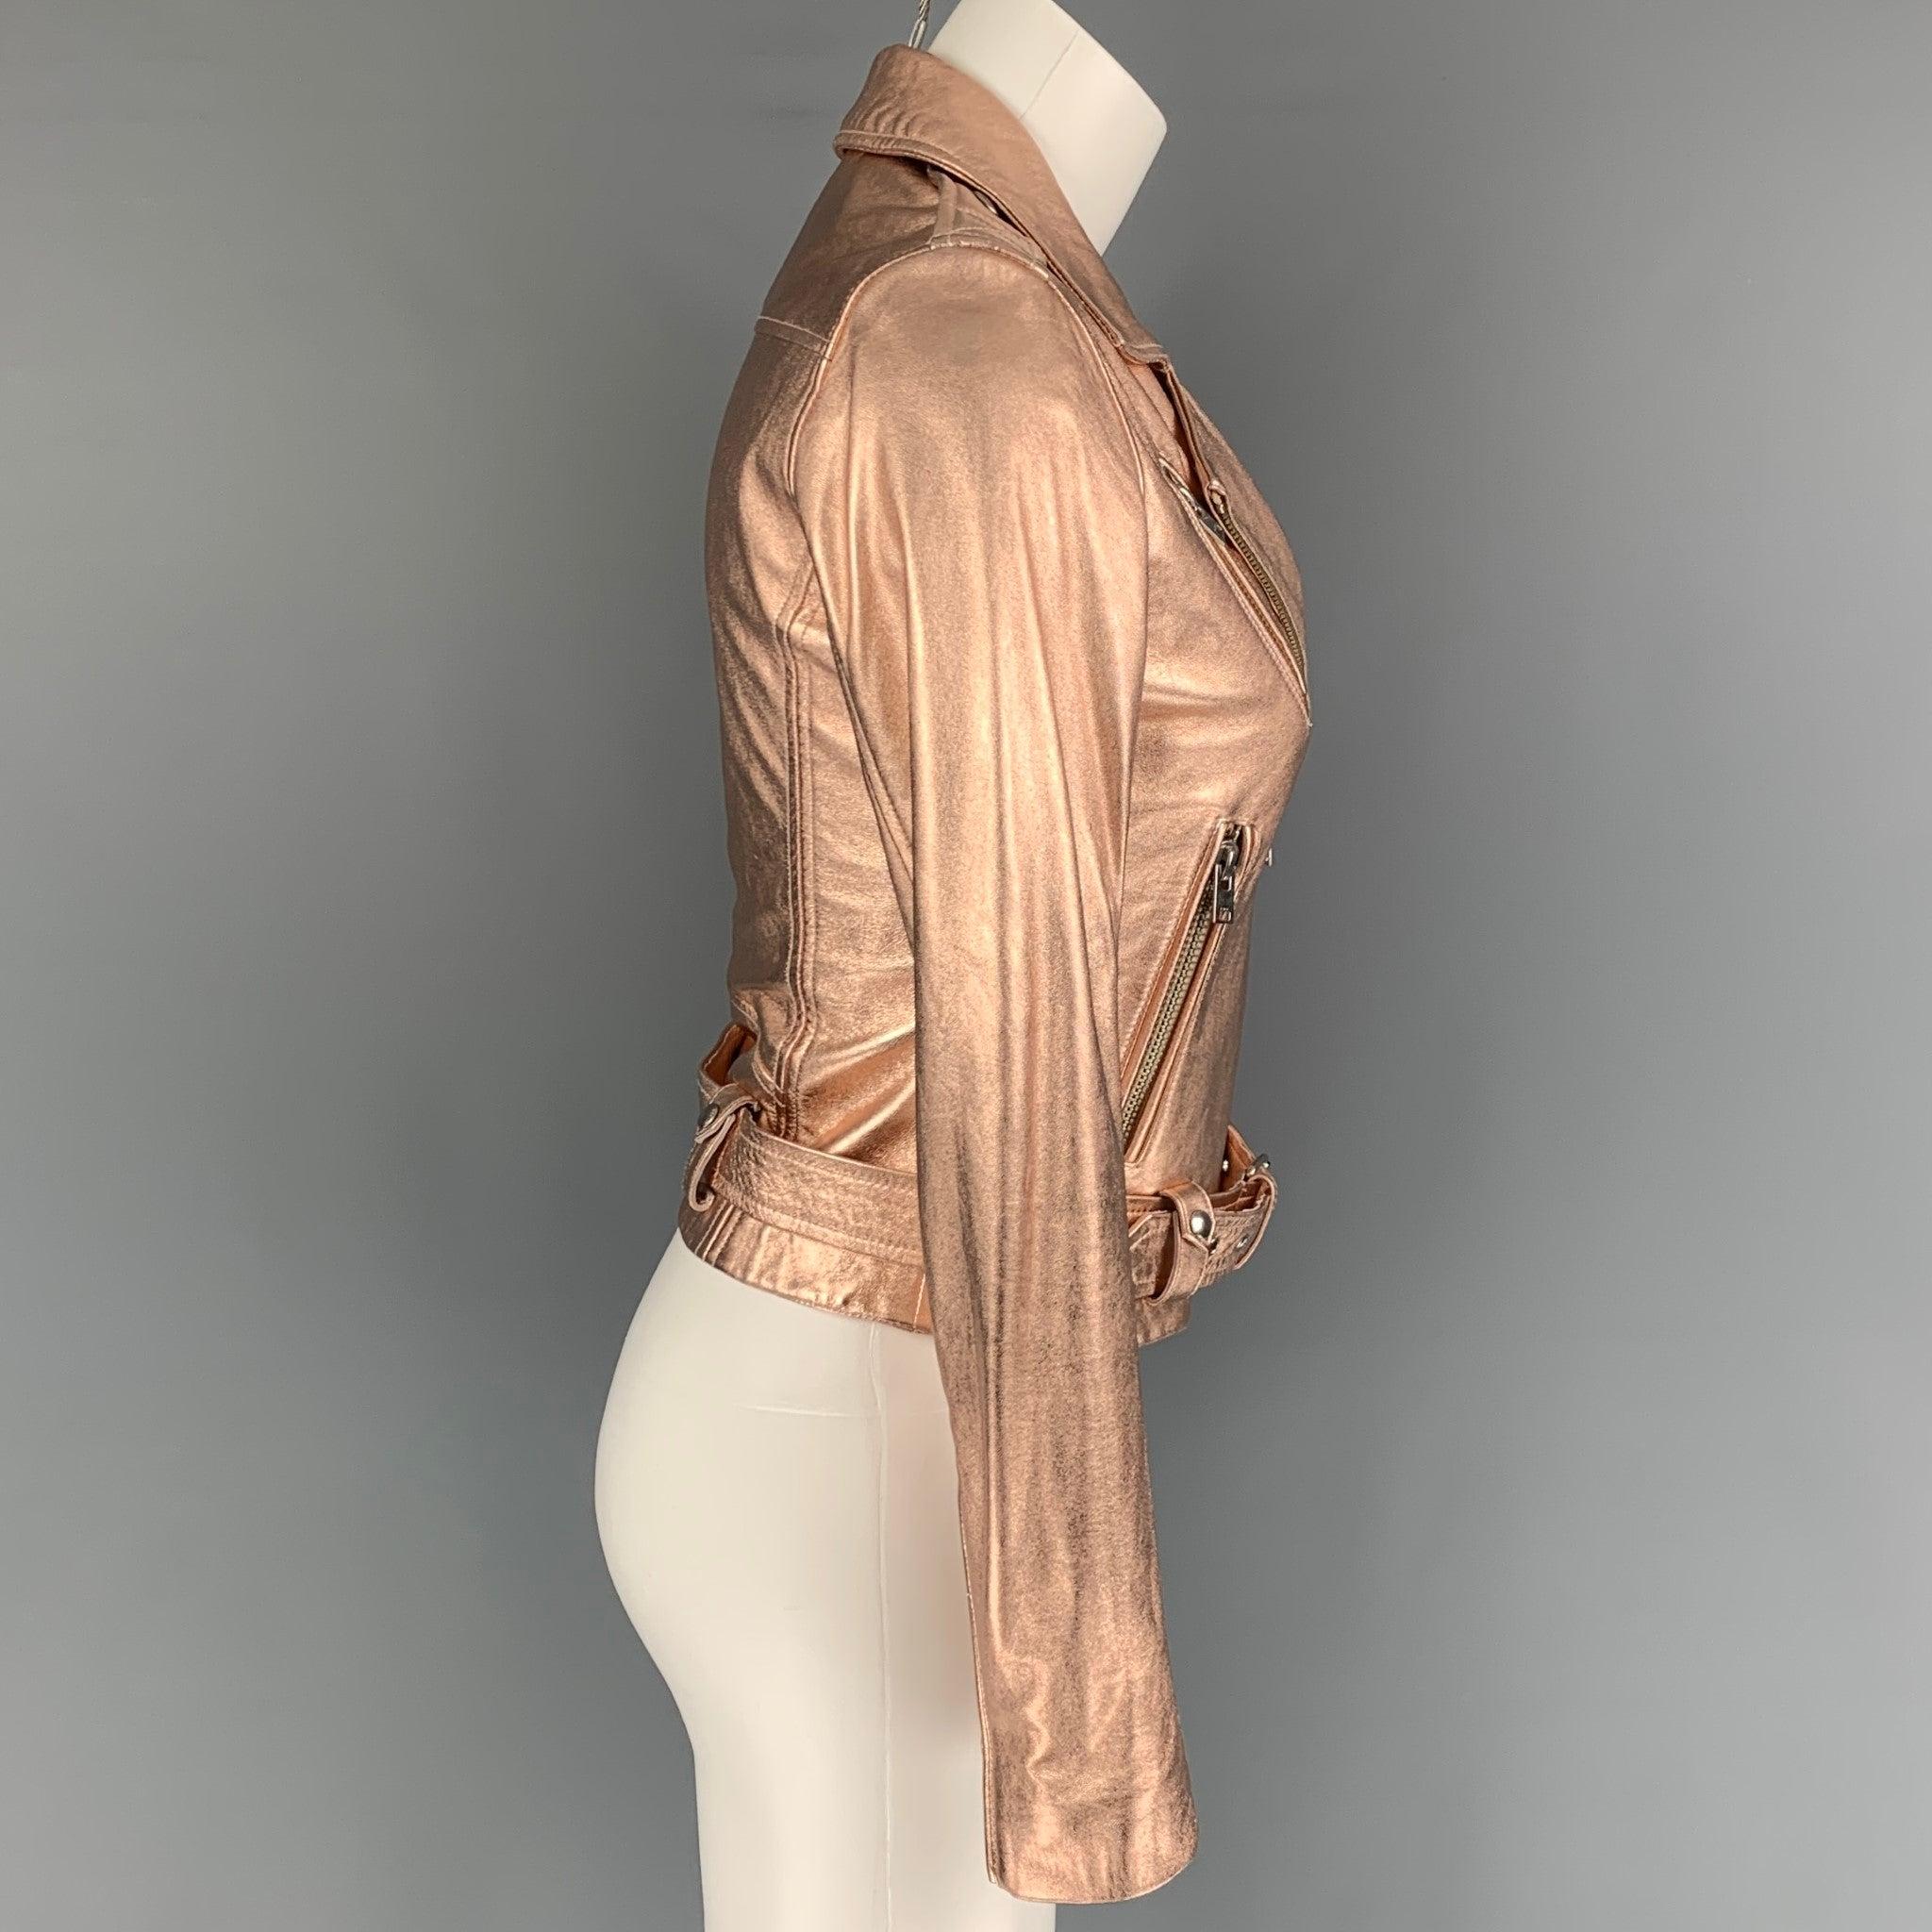 IRO jacket comes in a gold metallic leather featuring a biker style, zipper pockets, silver tone hardware, zipped cuffs, epaulettes, and a zip up closure.
Very Good
Pre-Owned Condition. 

Marked:   36 

Measurements: 
 
Shoulder: 14 inches  Bust: 30